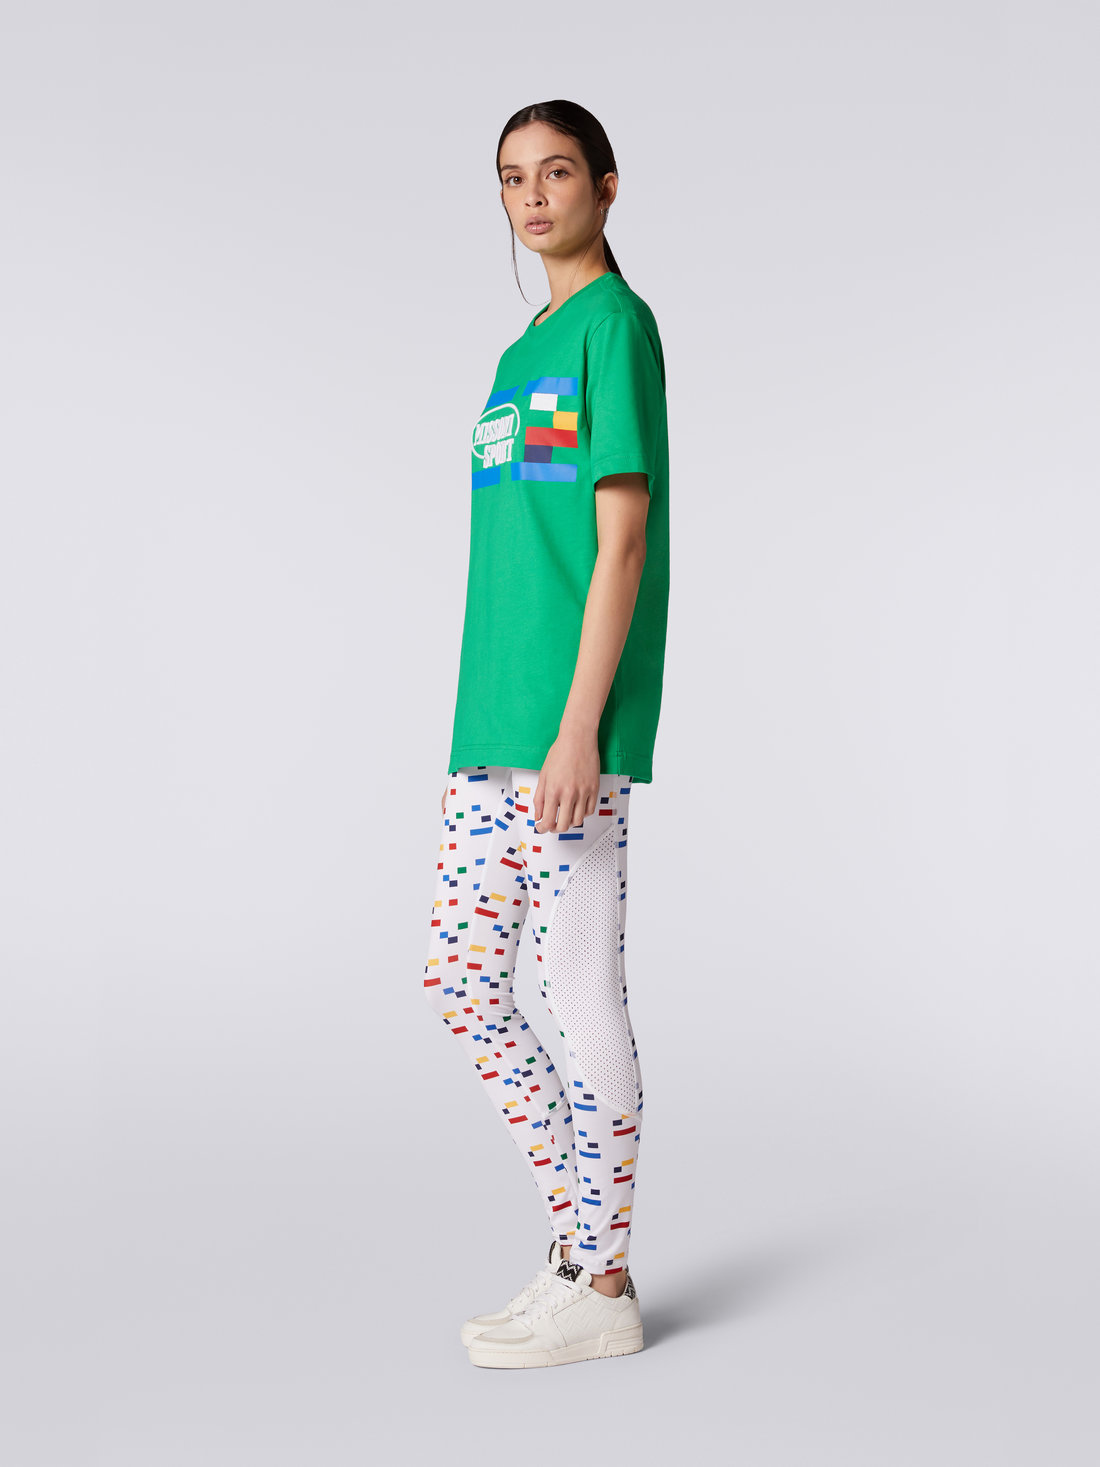 Crew-neck cotton T-shirt with logo and contrasting piping, Green & Multicoloured  - DC23SL00BJ00EBS6118 - 2